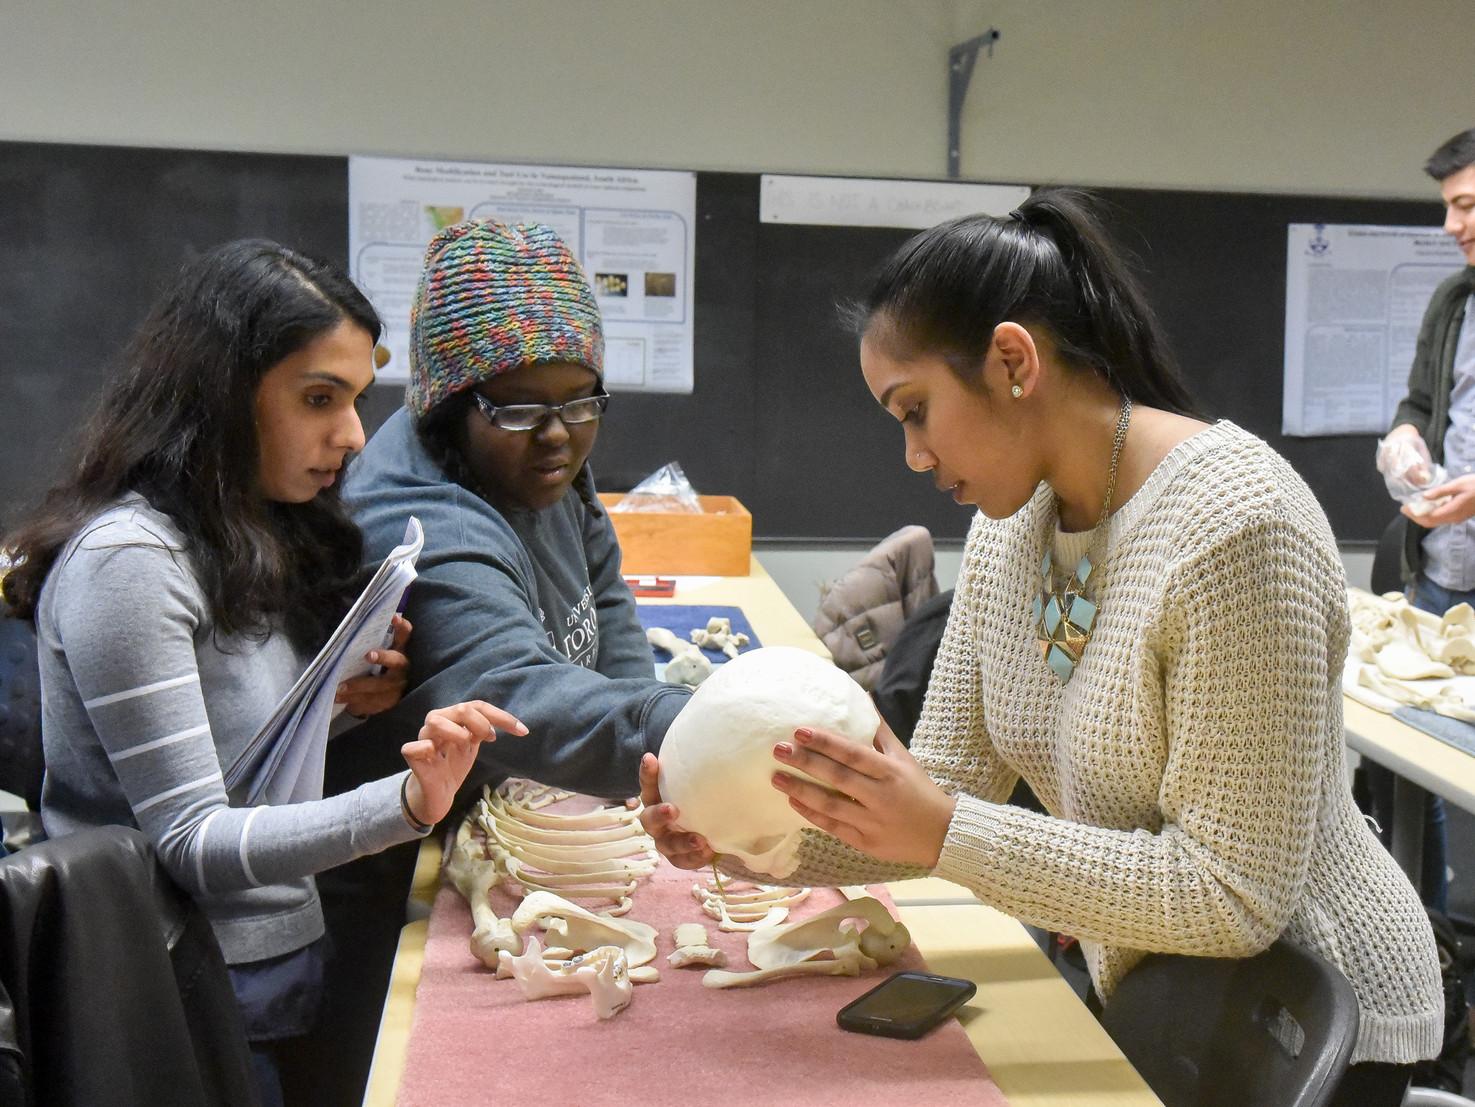 Three students in an anthropology lab examining a skull